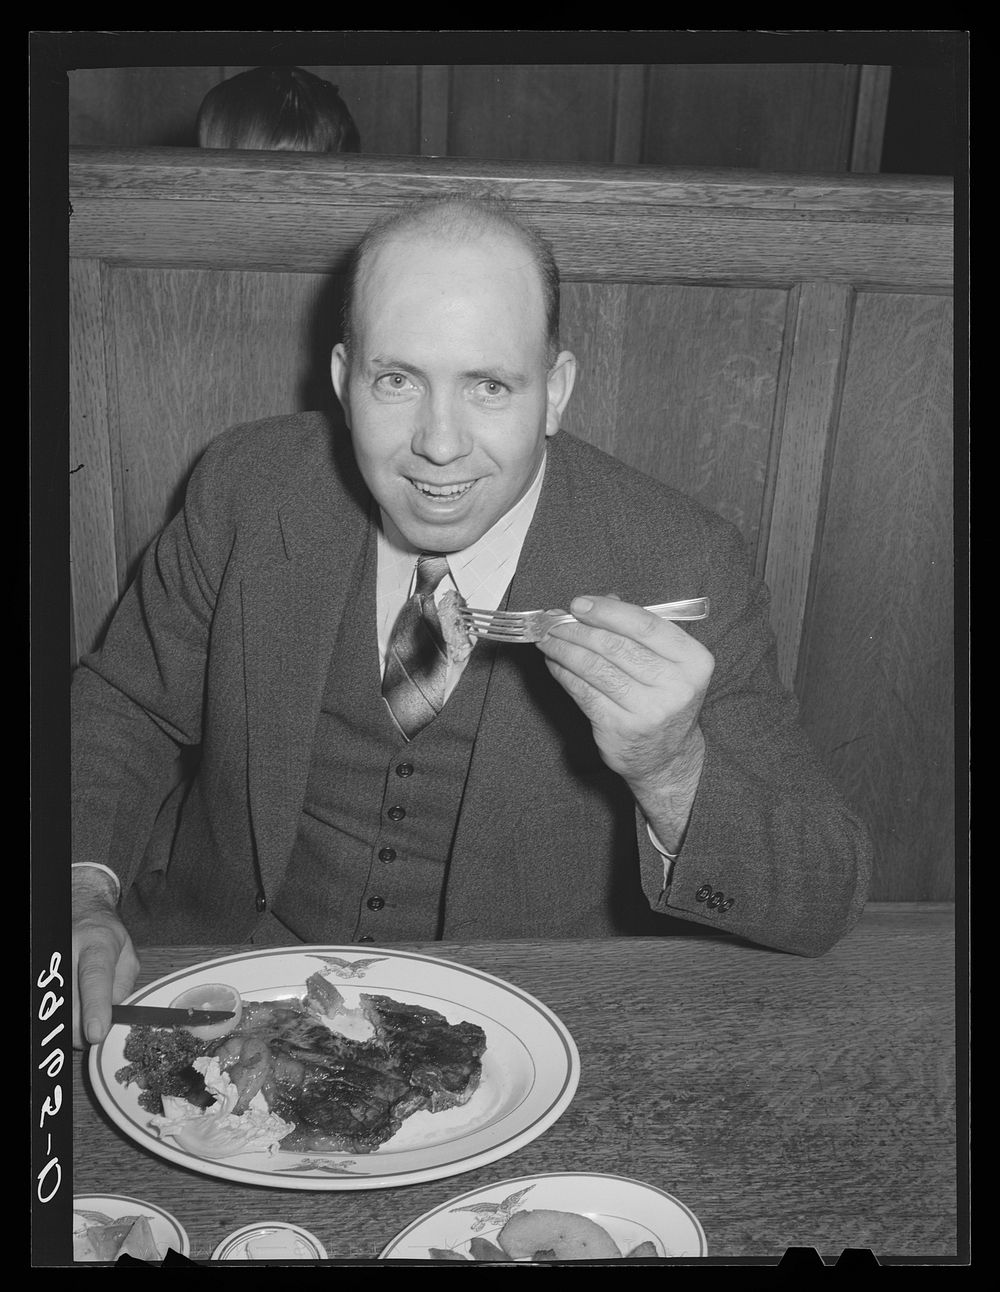 Diner with steak. Scotts Bluff, Nebraska. Sourced from the Library of Congress.